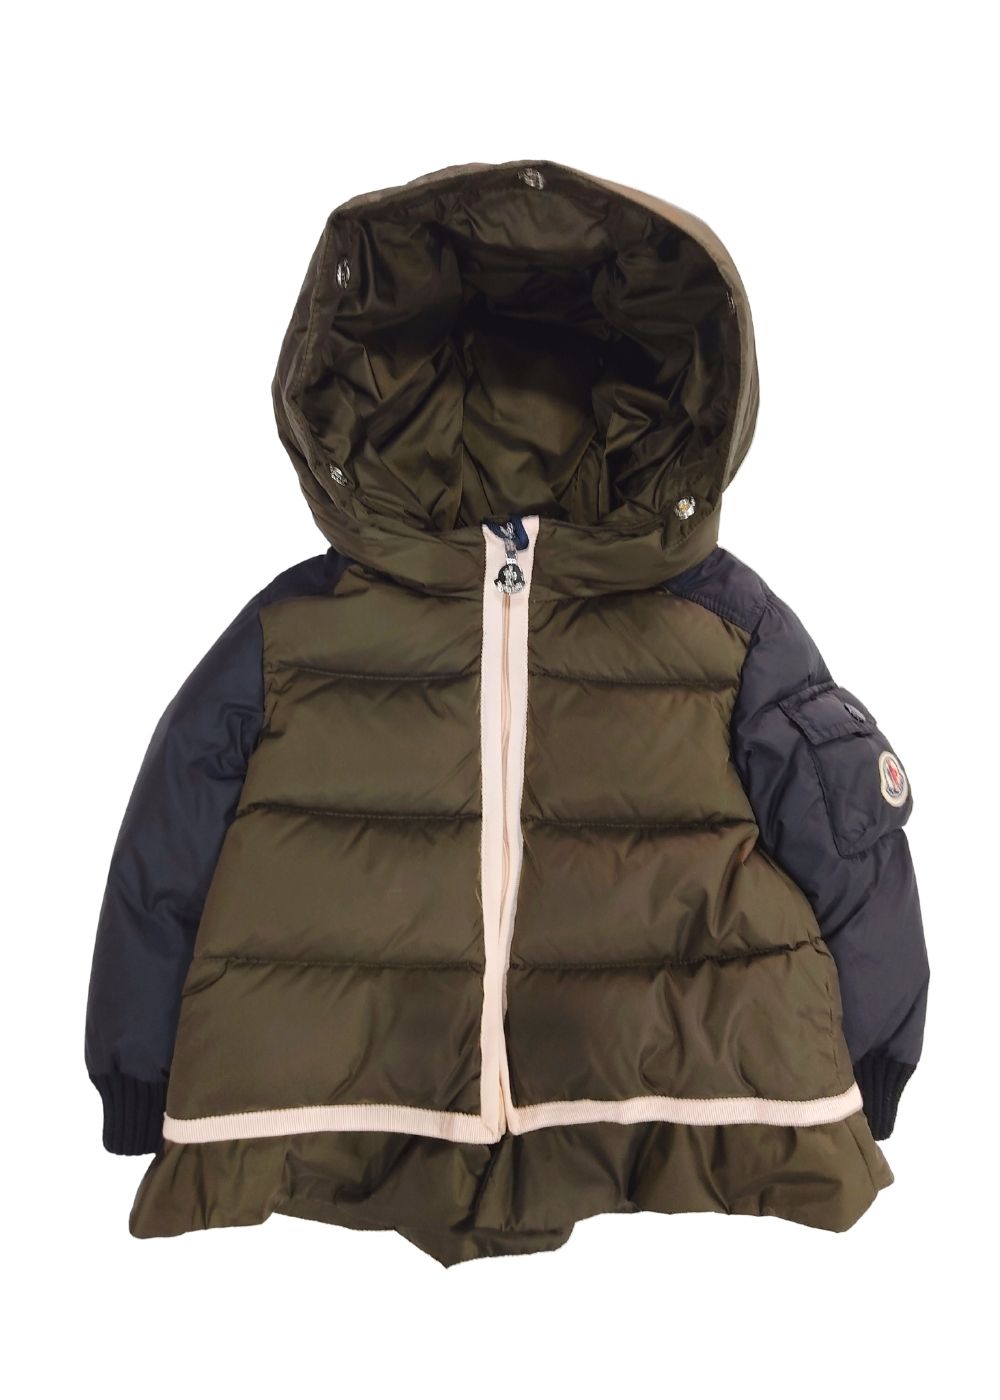 Featured image for “MONCLER PARKA MULTICOLOR”